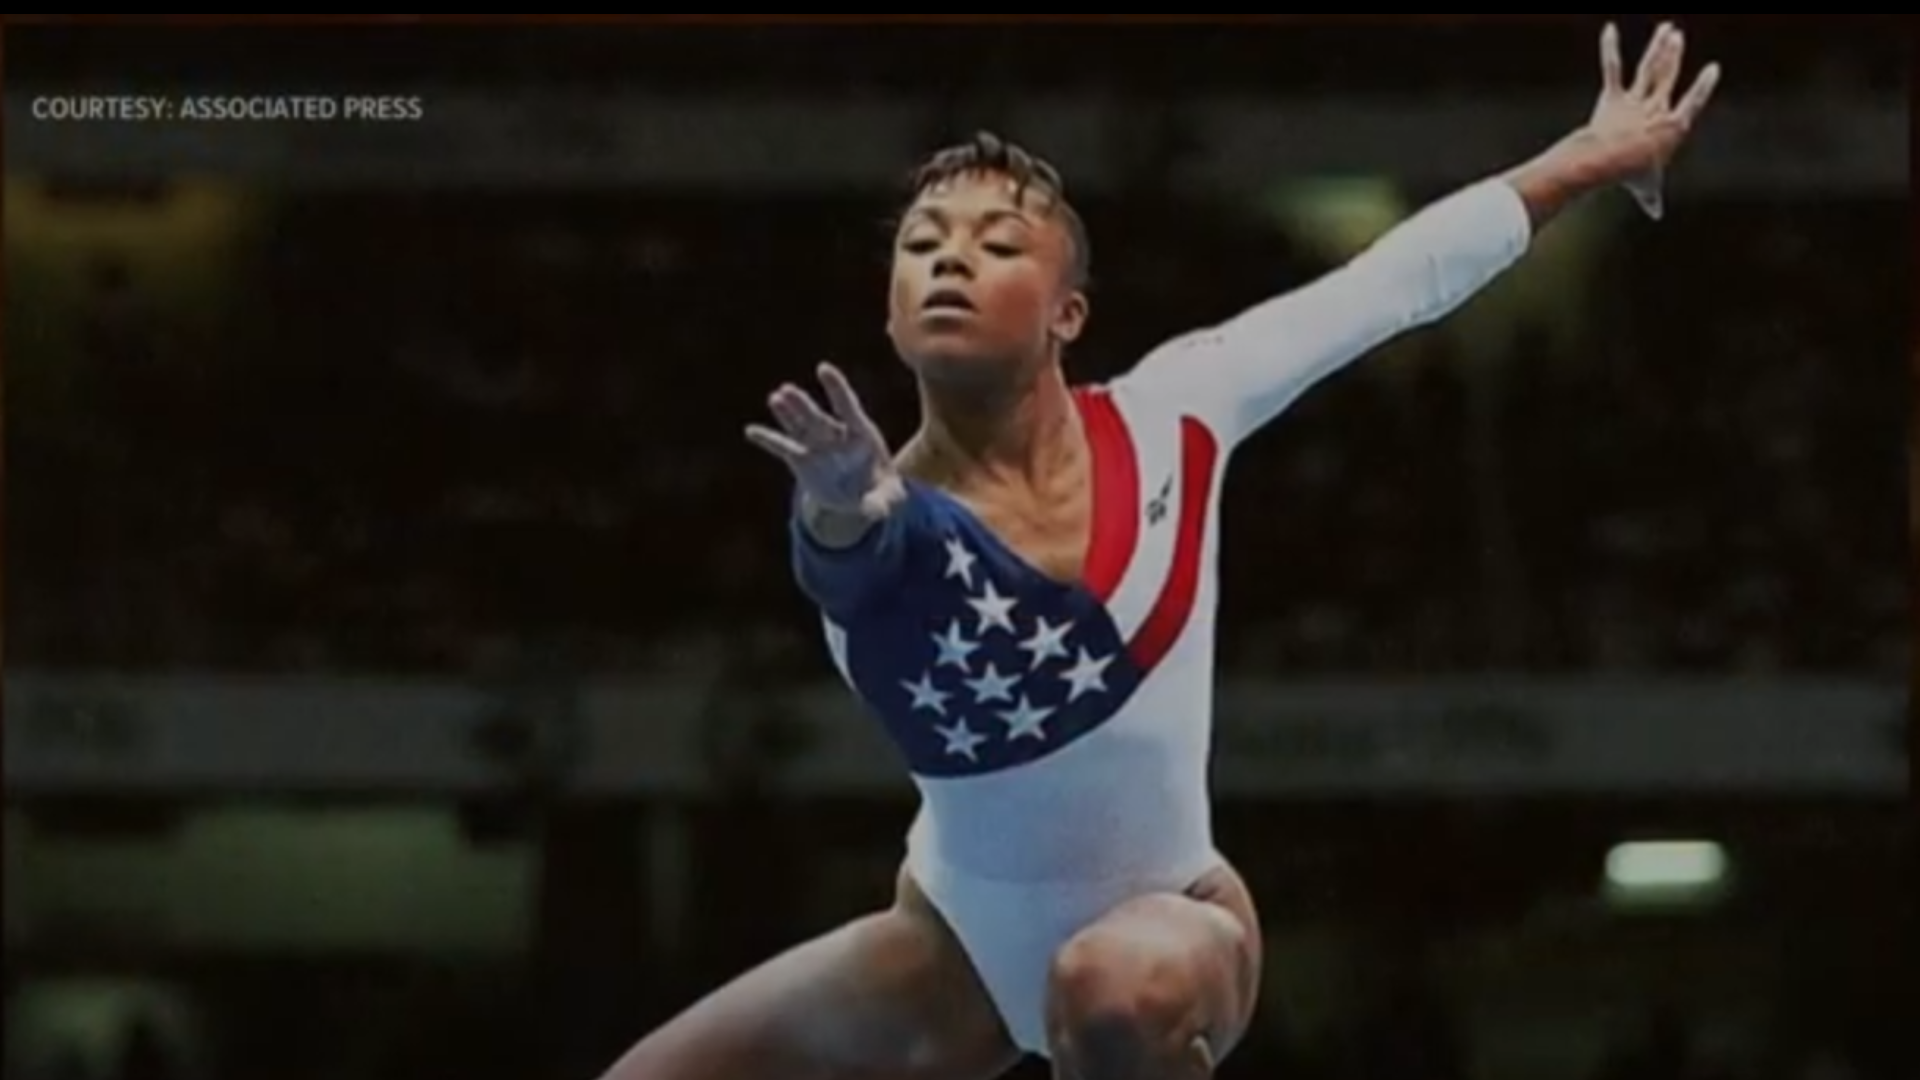 The three-time Olympian gymnast dedicated her life to the sport. Now, she is changing the future class of gymnasts to be better people.